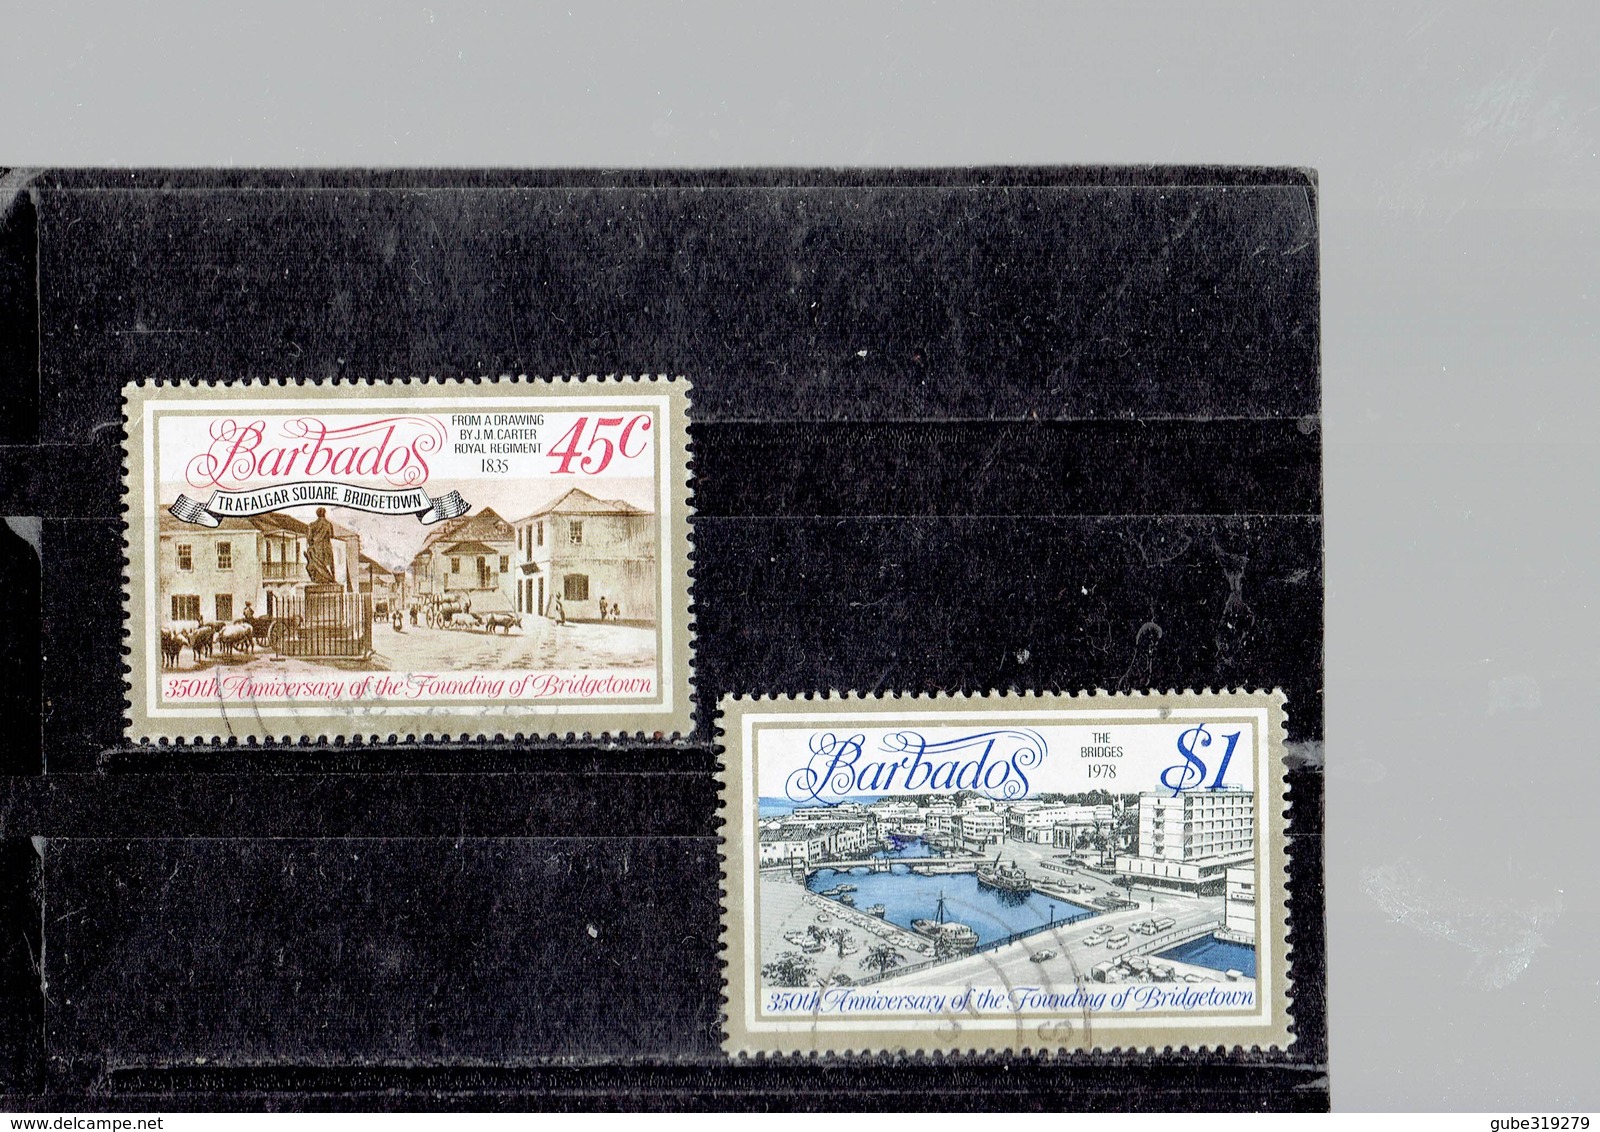 BARBADOS 1978 - USED 350 YEARS OF BRIDGETOWN 2 STAMPS OF 45 C-1$   SCOTT NR. 472-473 PERFECT BK BL COM - Barbades (1966-...)